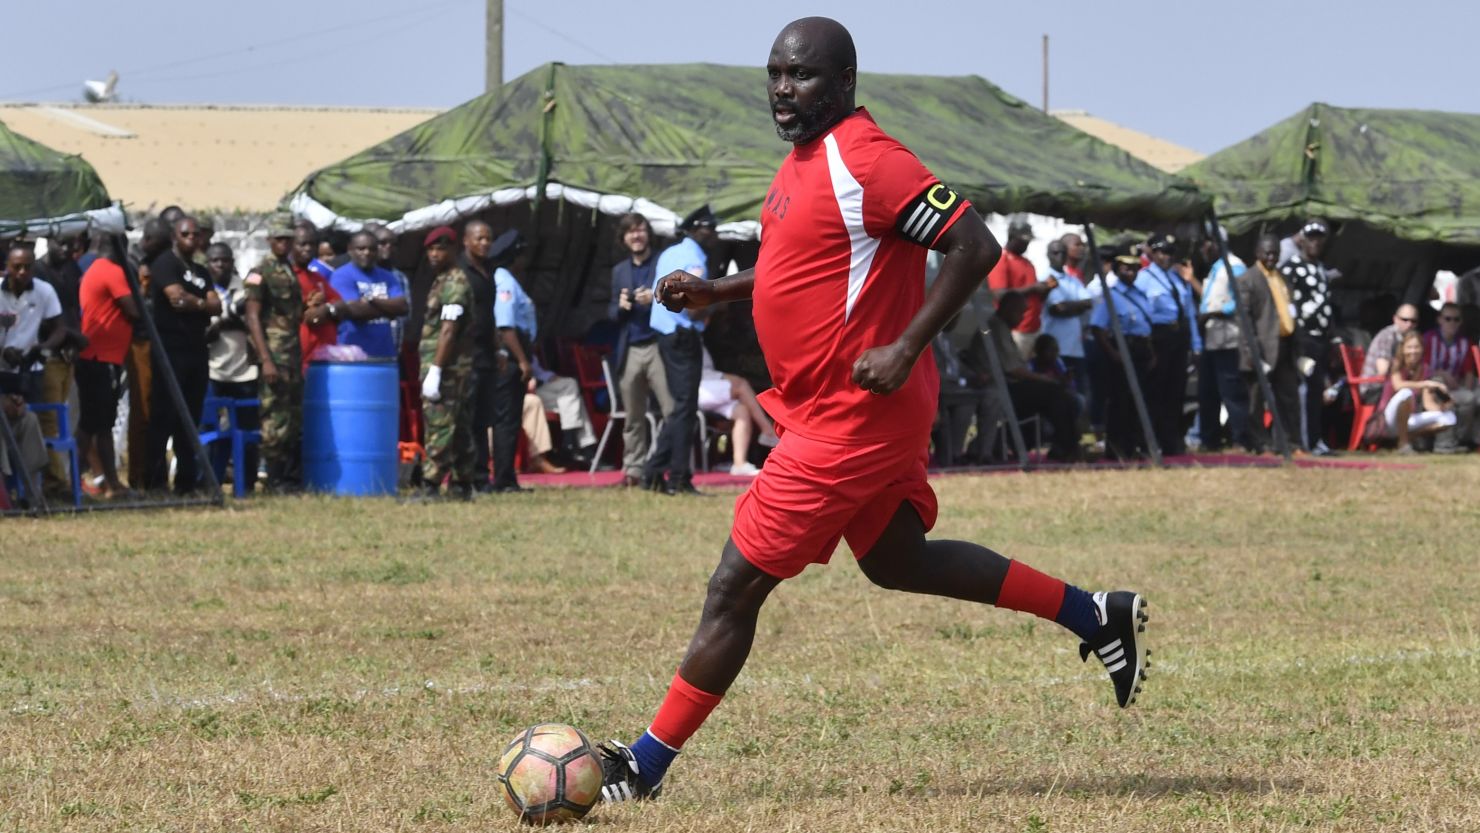 Liberia's president has dusted of his boots before. Here he is playing a friendly football match between Weah All Stars team and Armed Forces of Liberia team, two days ahead of his inauguration.